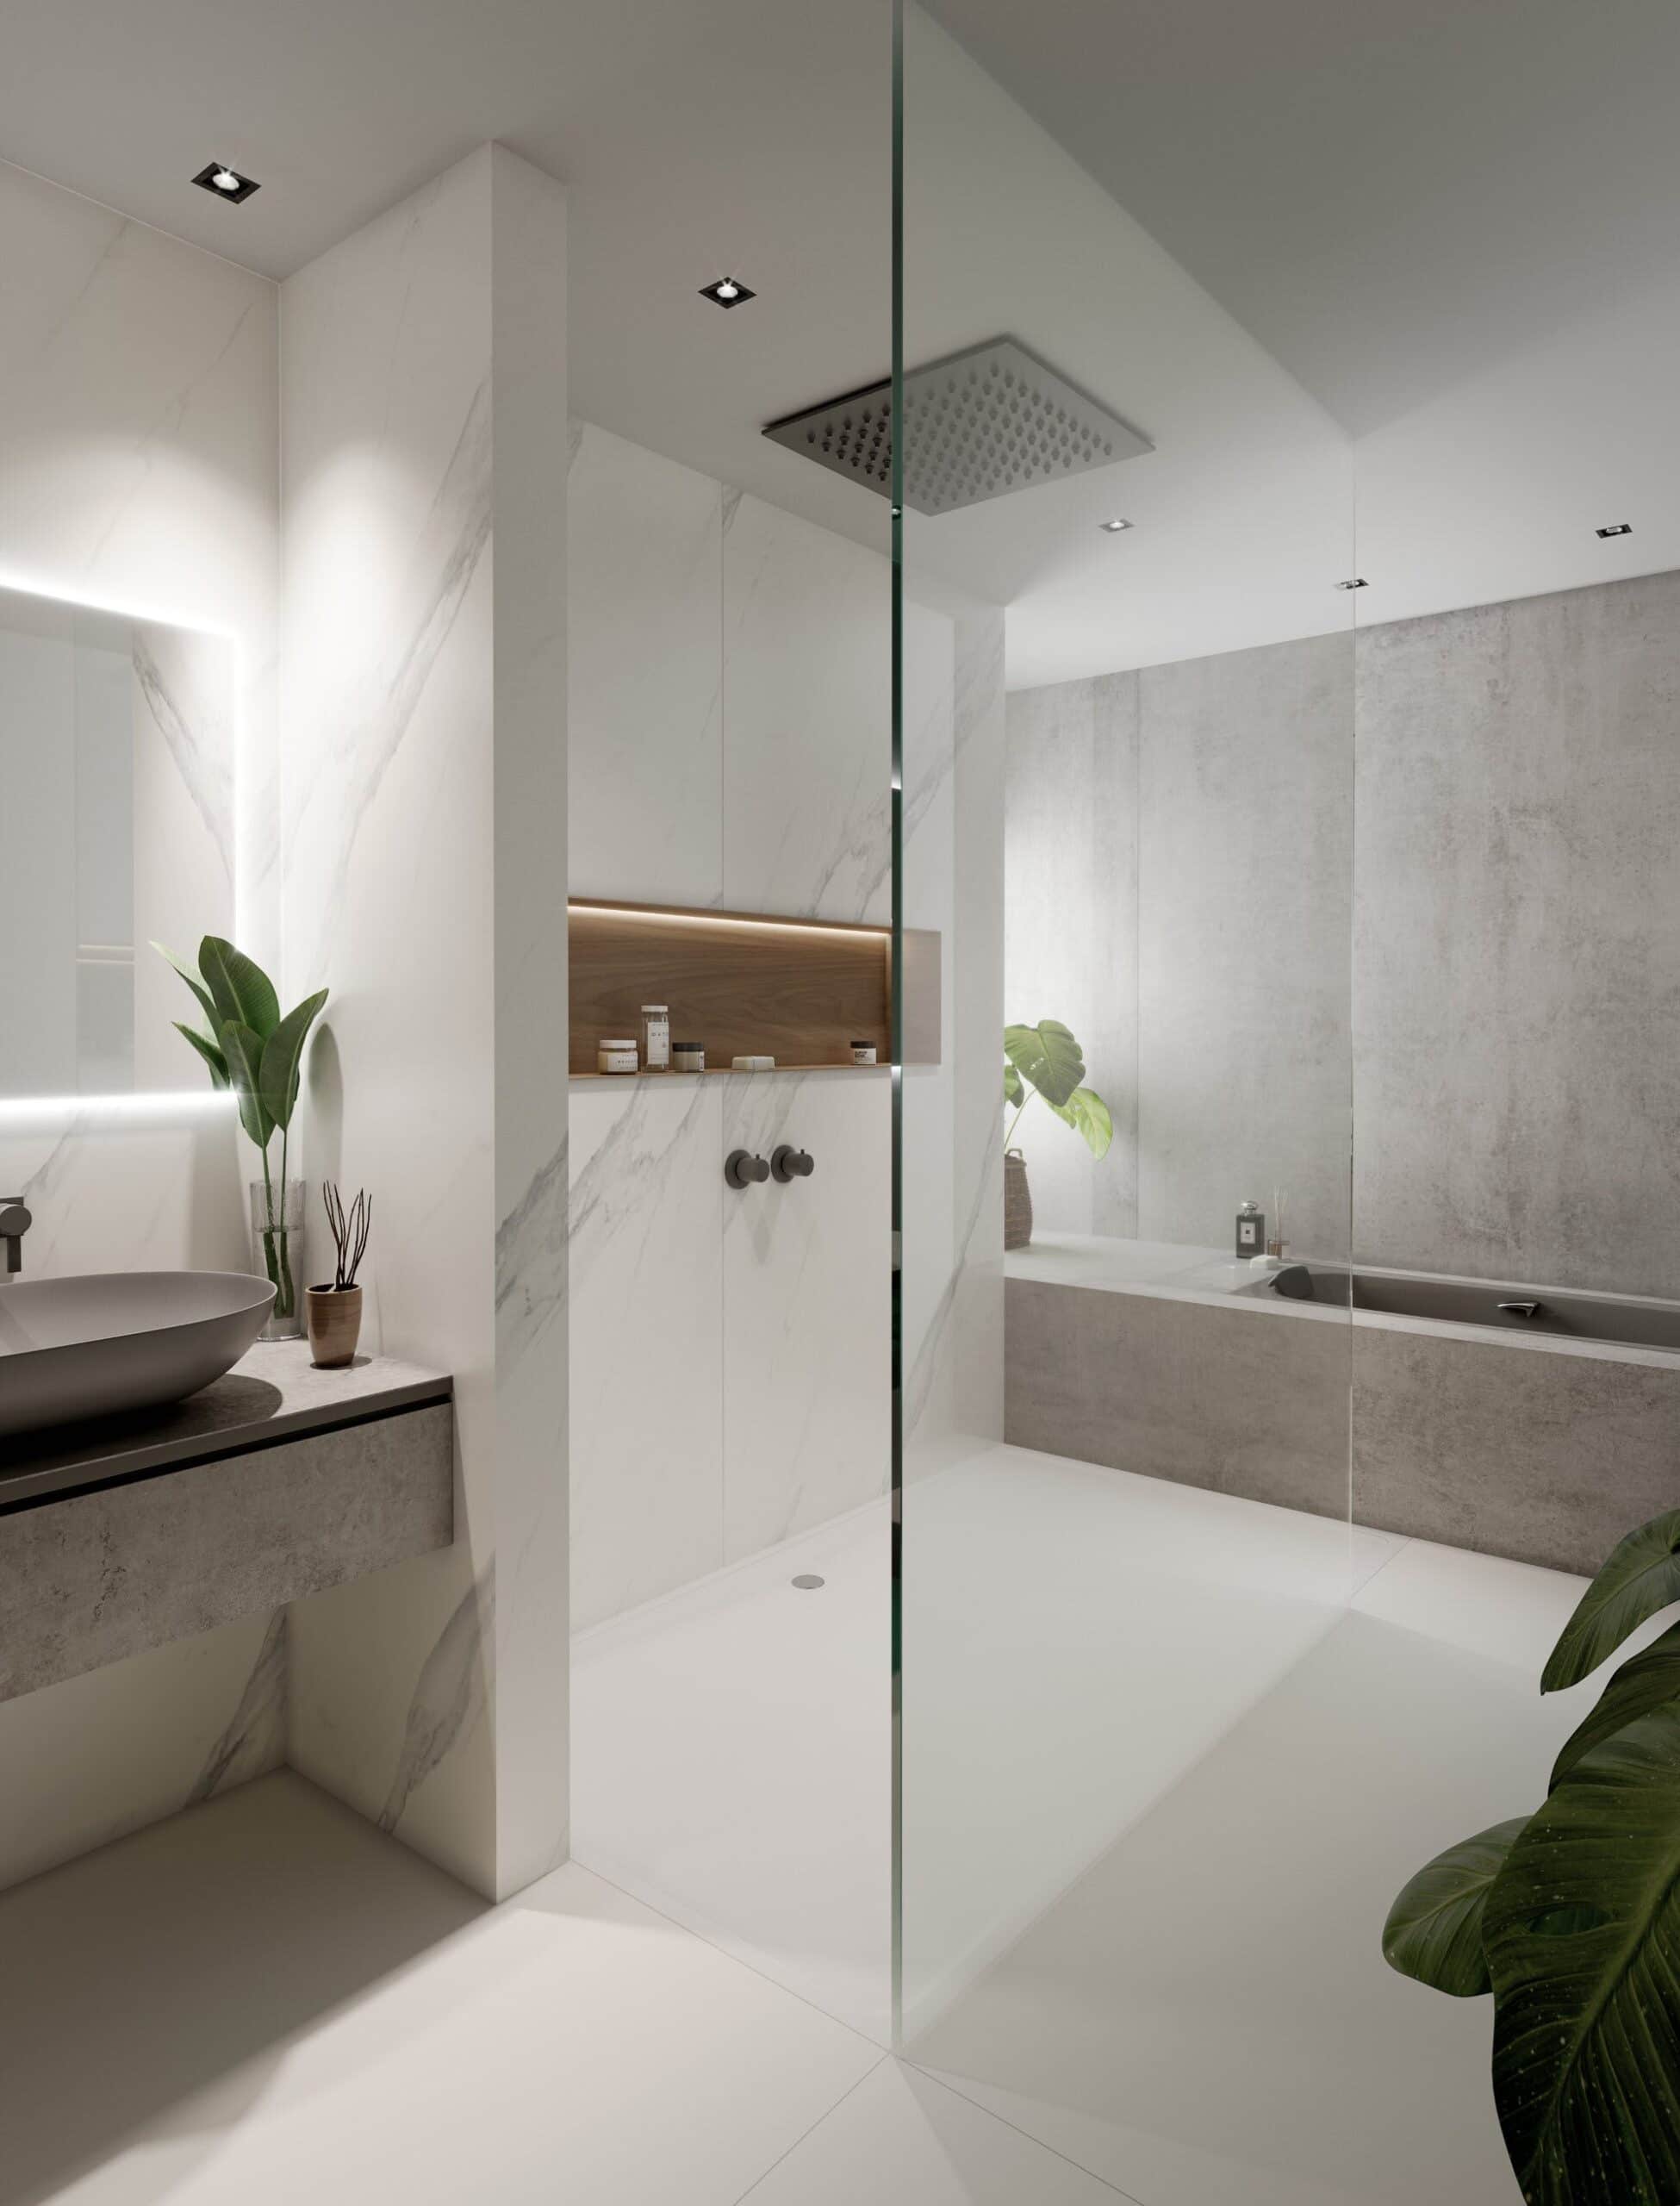 Image of Baño gris blanco 2 scaled in Spring at home: let’s make the most of it! - Cosentino